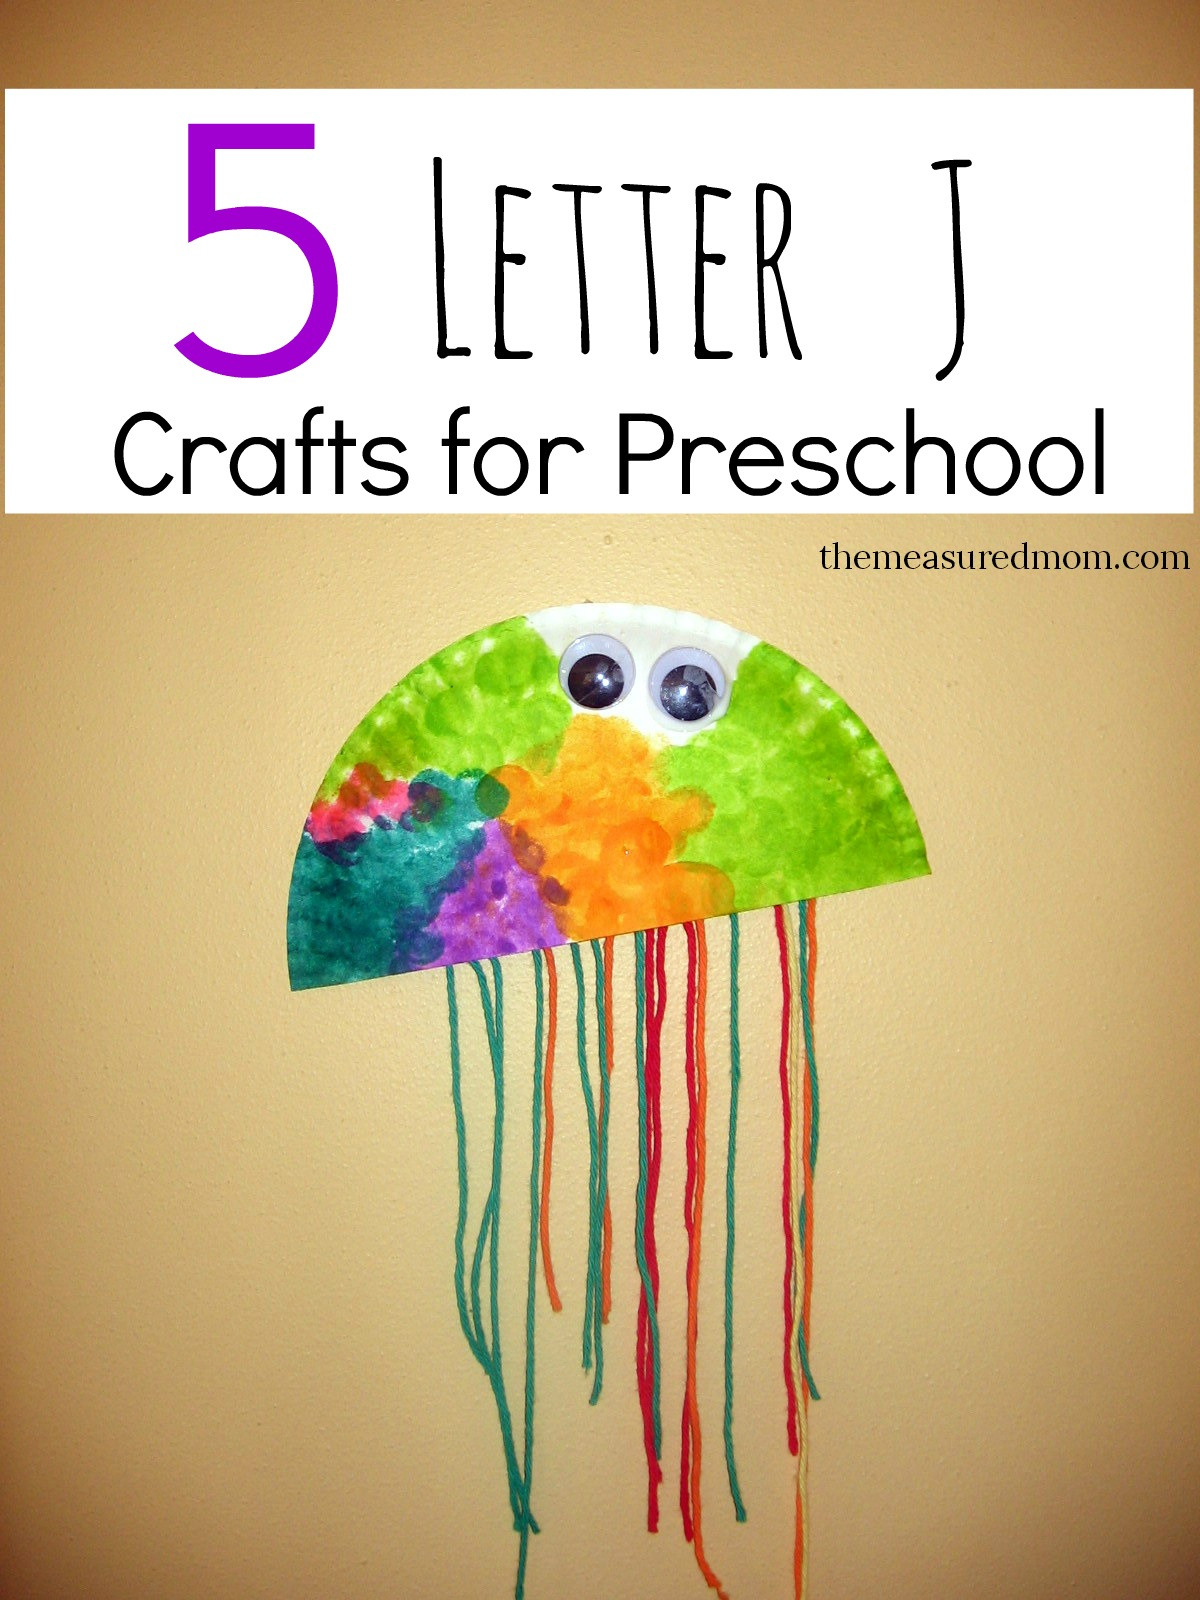 Craft Projects For Preschoolers
 Letter J Crafts The Measured Mom